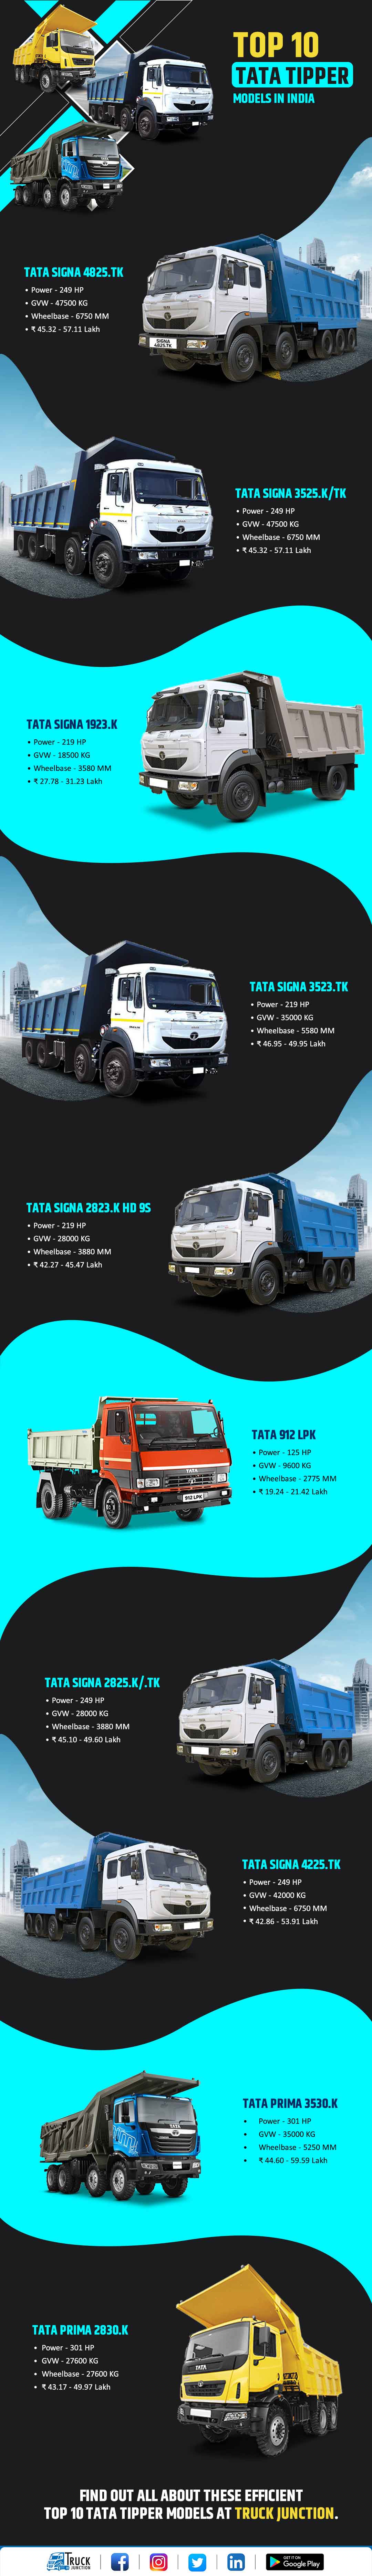 Top 10 Tata Tipper Models In India Price & Overview - Infographic